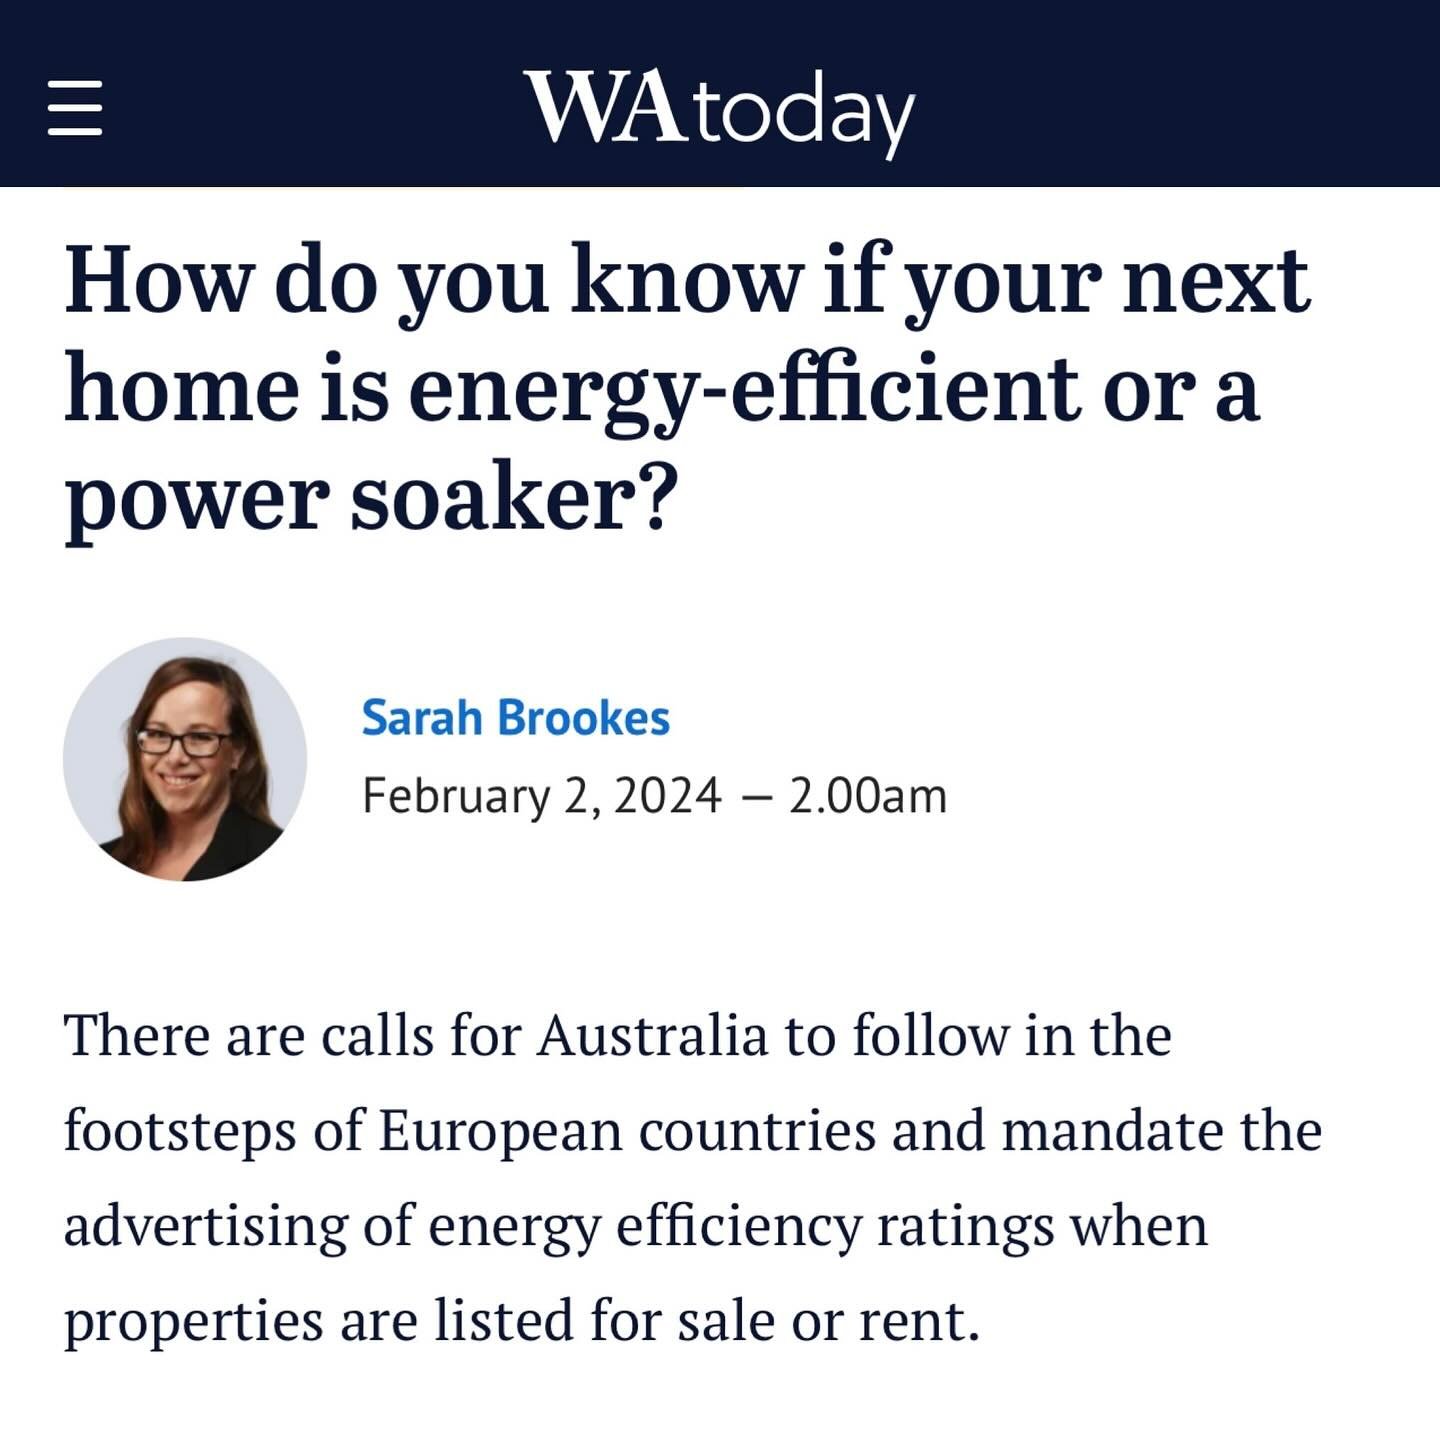 Our washing machines and fridges currently have energy ratings - what about our houses? 

There are calls for Australia to follow in the footsteps of European countries and mandate the advertising of energy efficiency ratings when properties are list